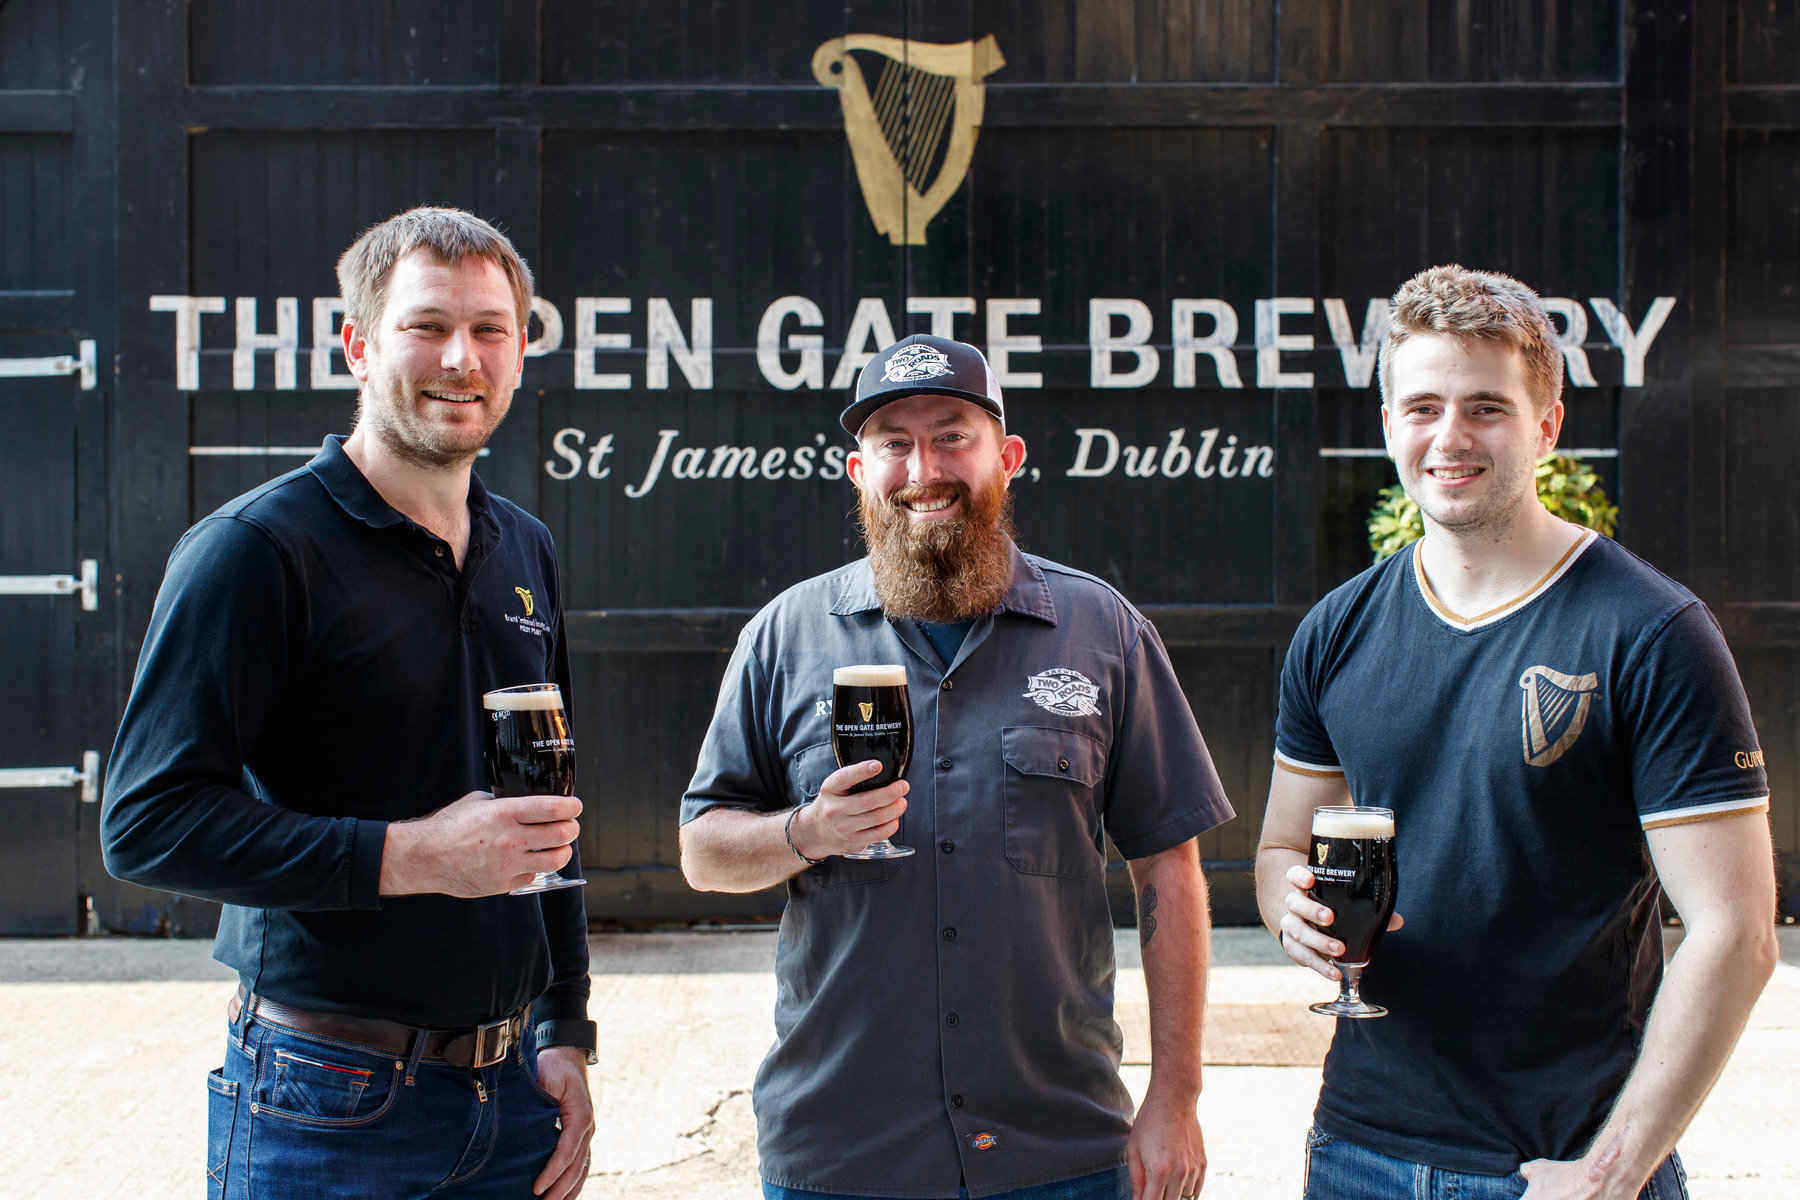 Collaborators at the launch of the new brew (from left): Guinness Master Brewer Peter Simpson, Two Roads Brewing Company’s Brand Ambassador Ryan Crowley and Guinness Brewer Patrick Isard.